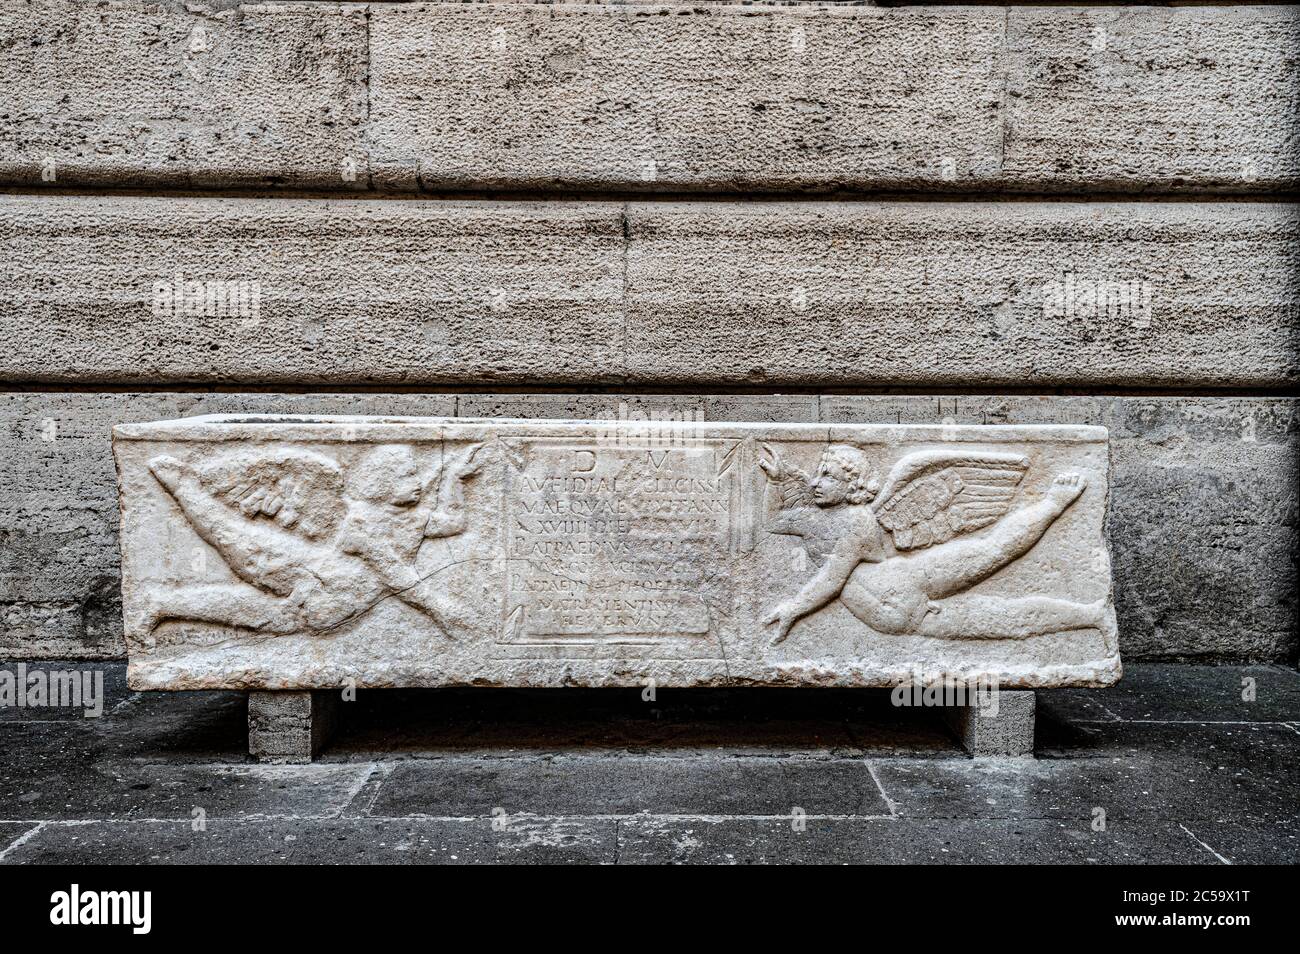 Italy lazio Roman sarcophagus in the courtyard of Palazzo Braschi in Rome Stock Photo